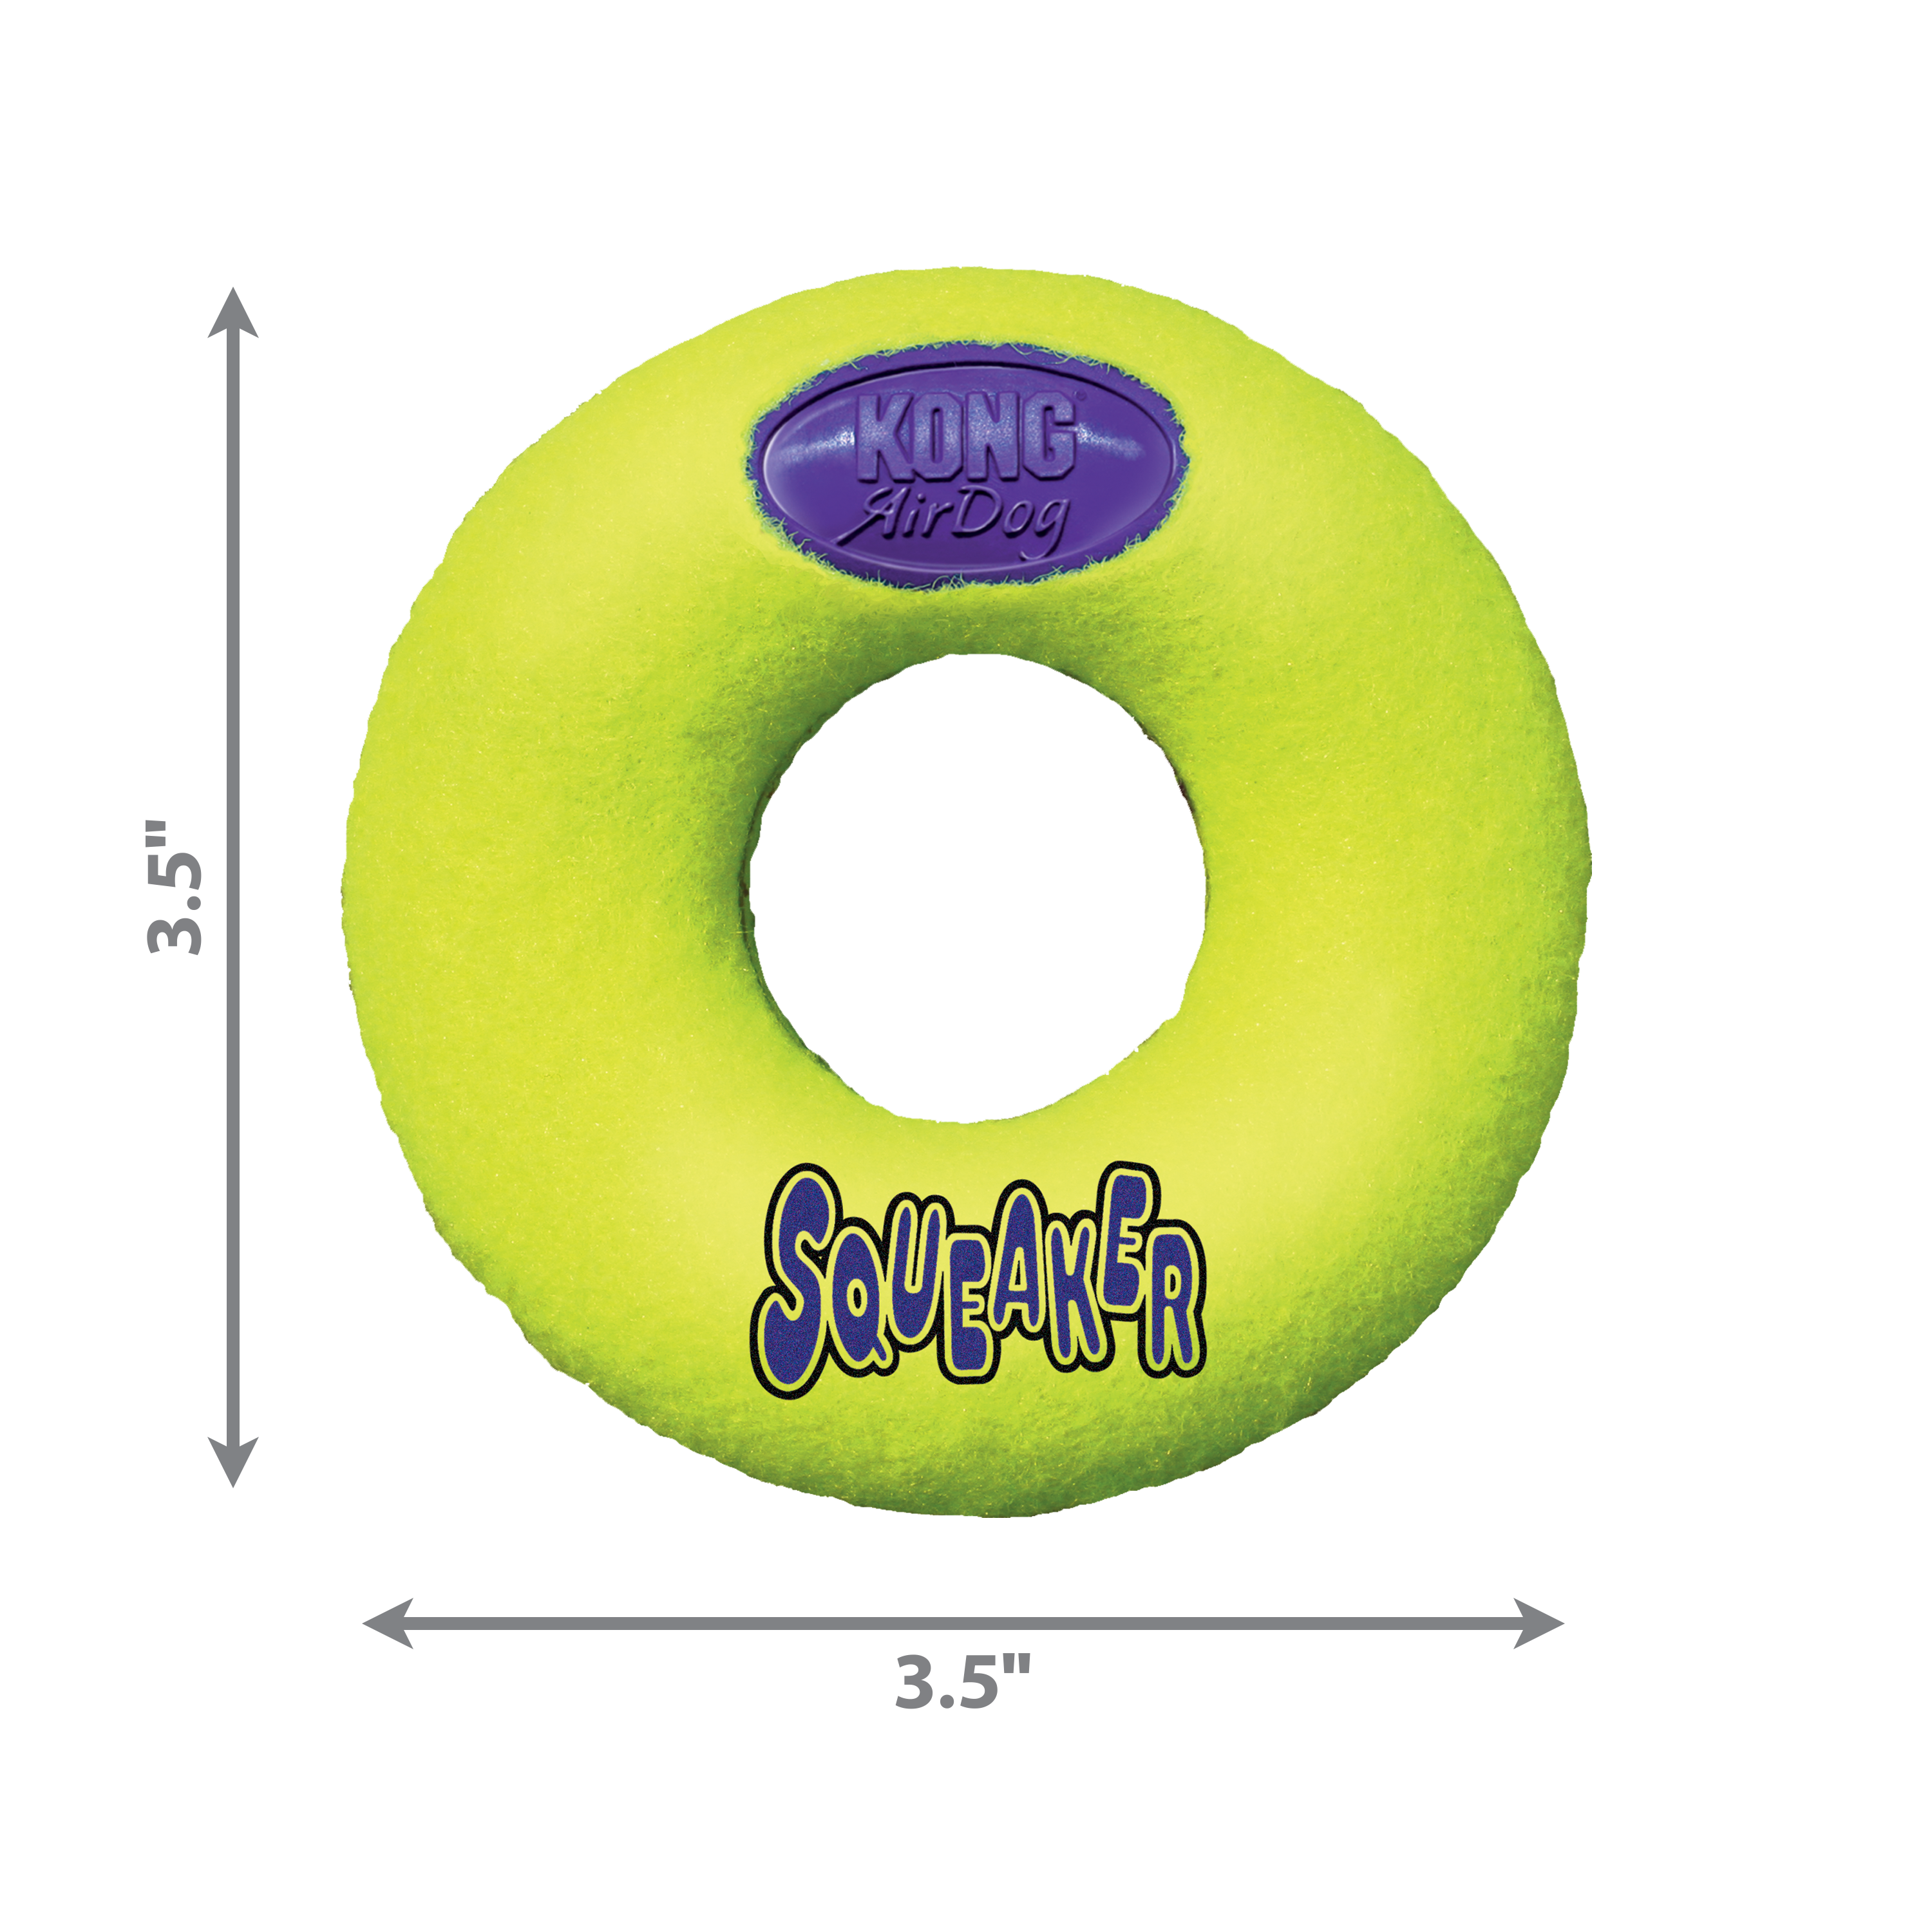 AirDog Squeaker Donut dimoffpack product image